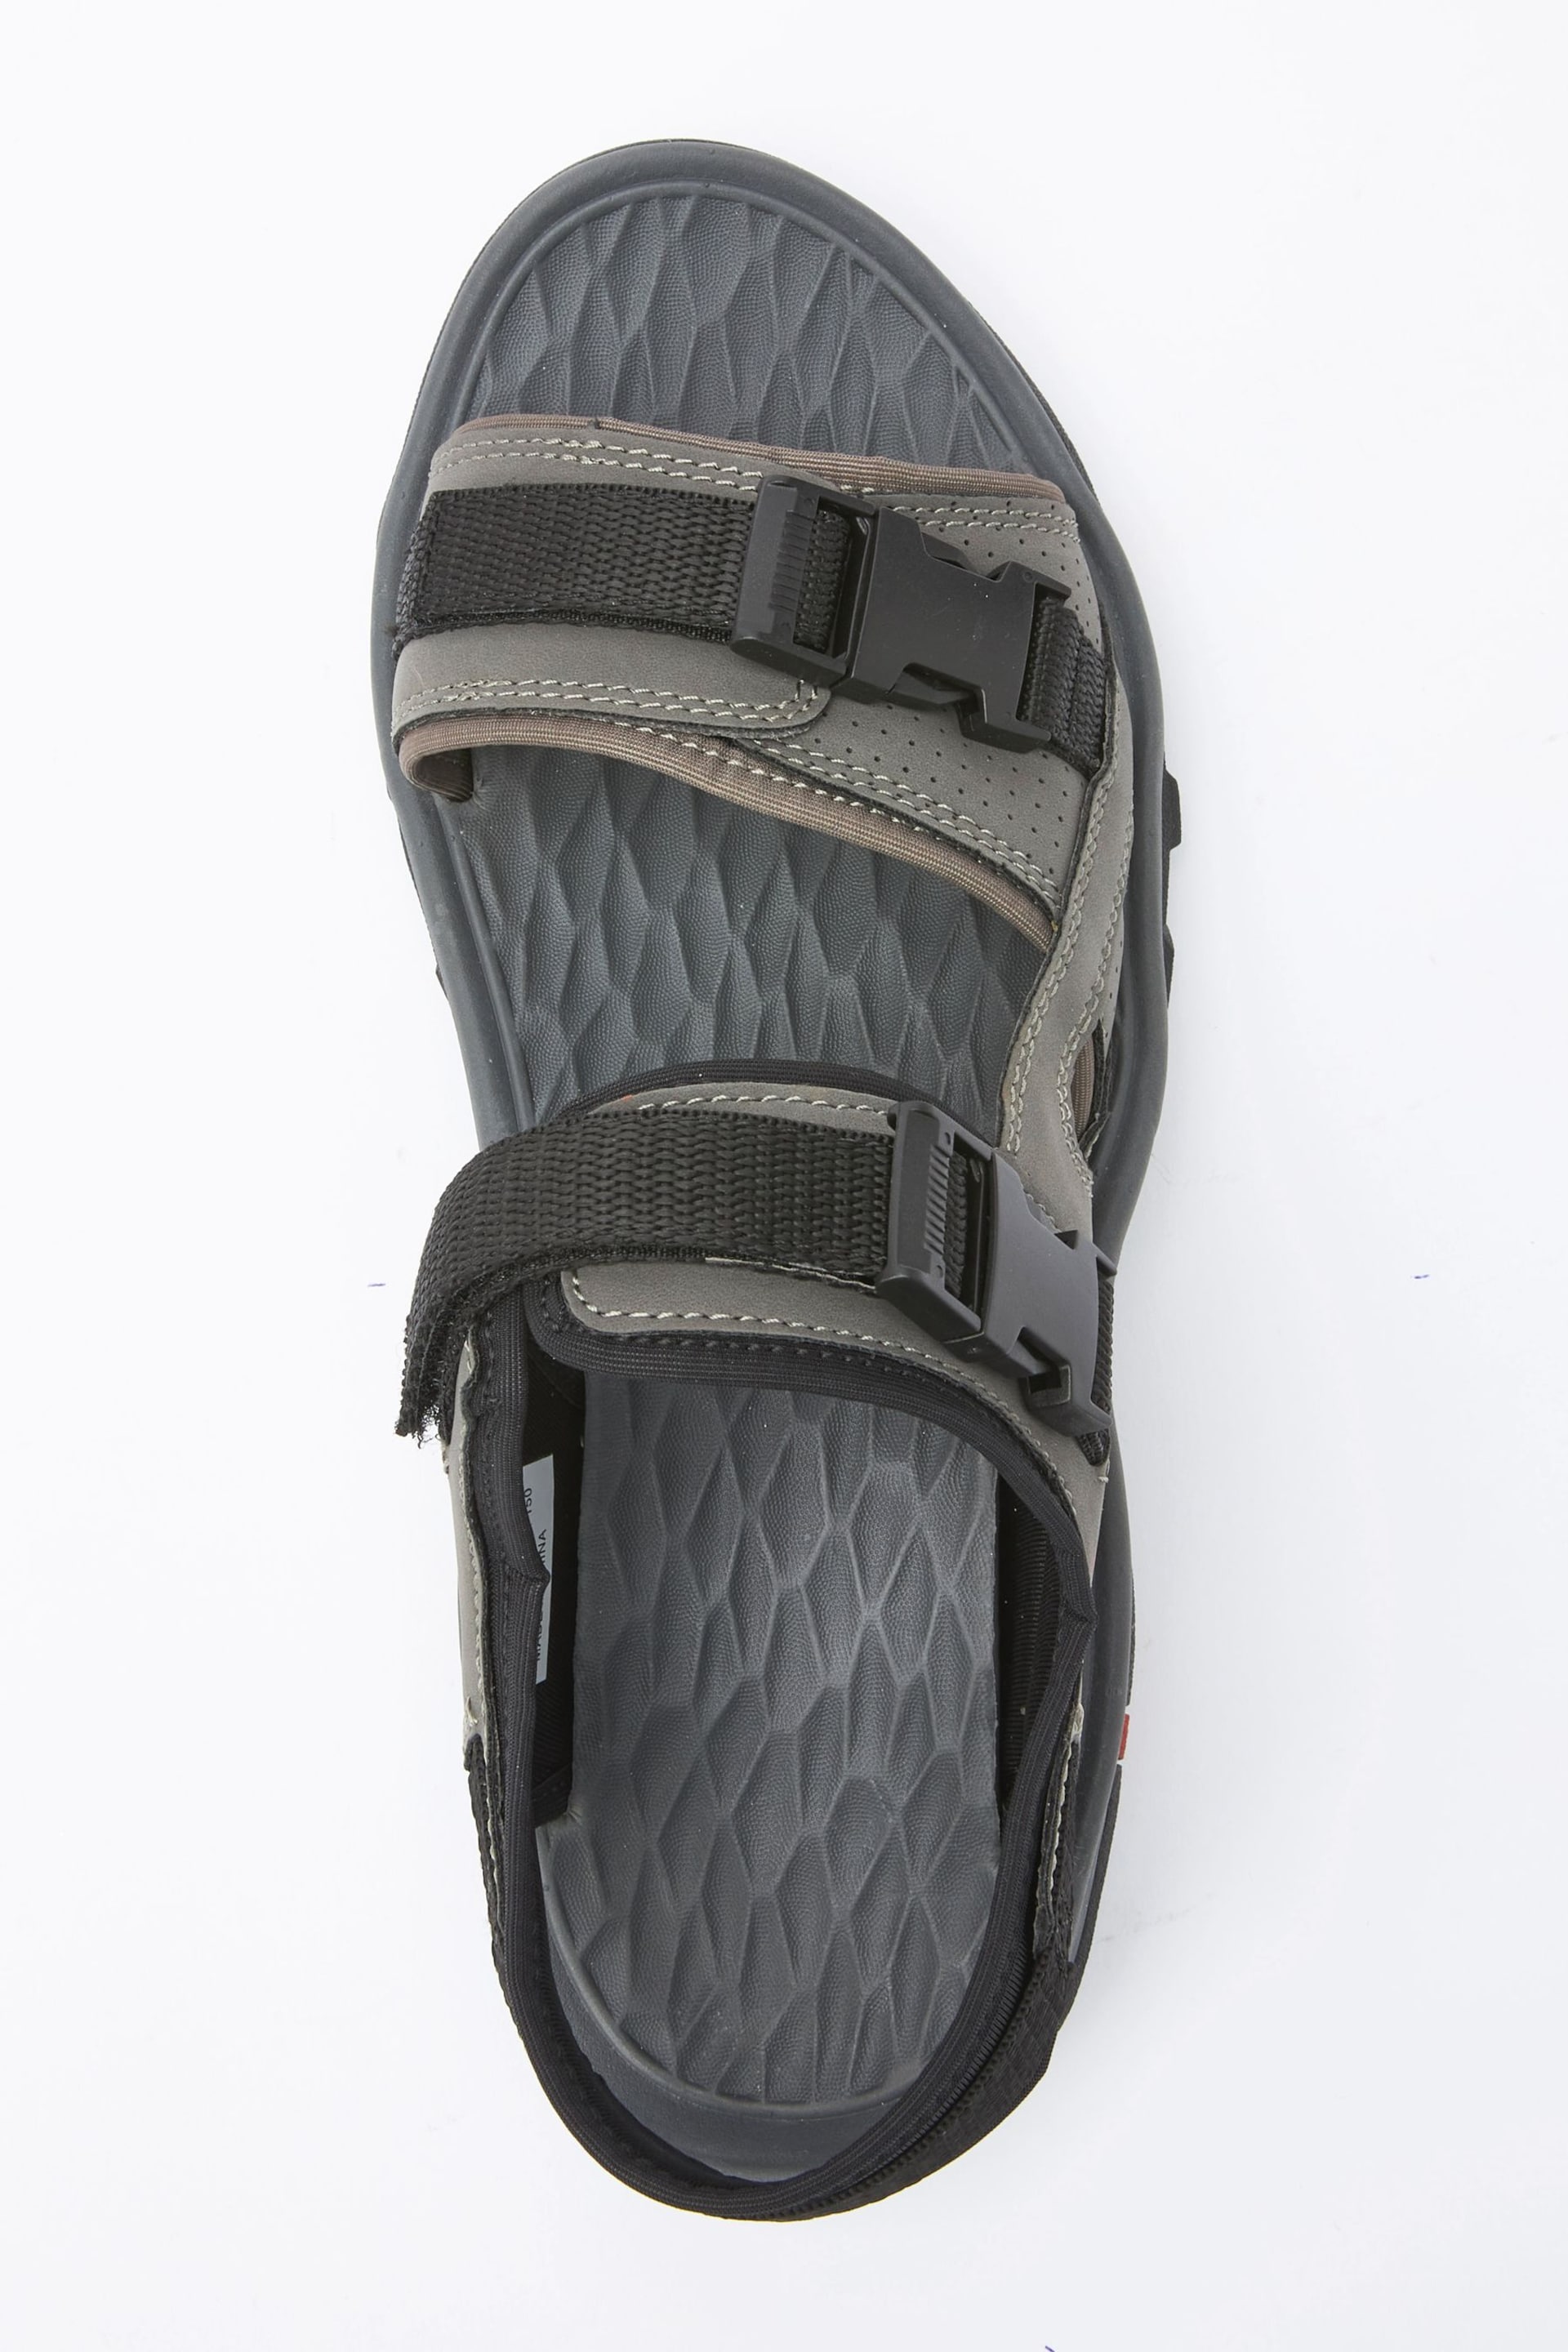 Grey Sports Sandals - Image 4 of 5